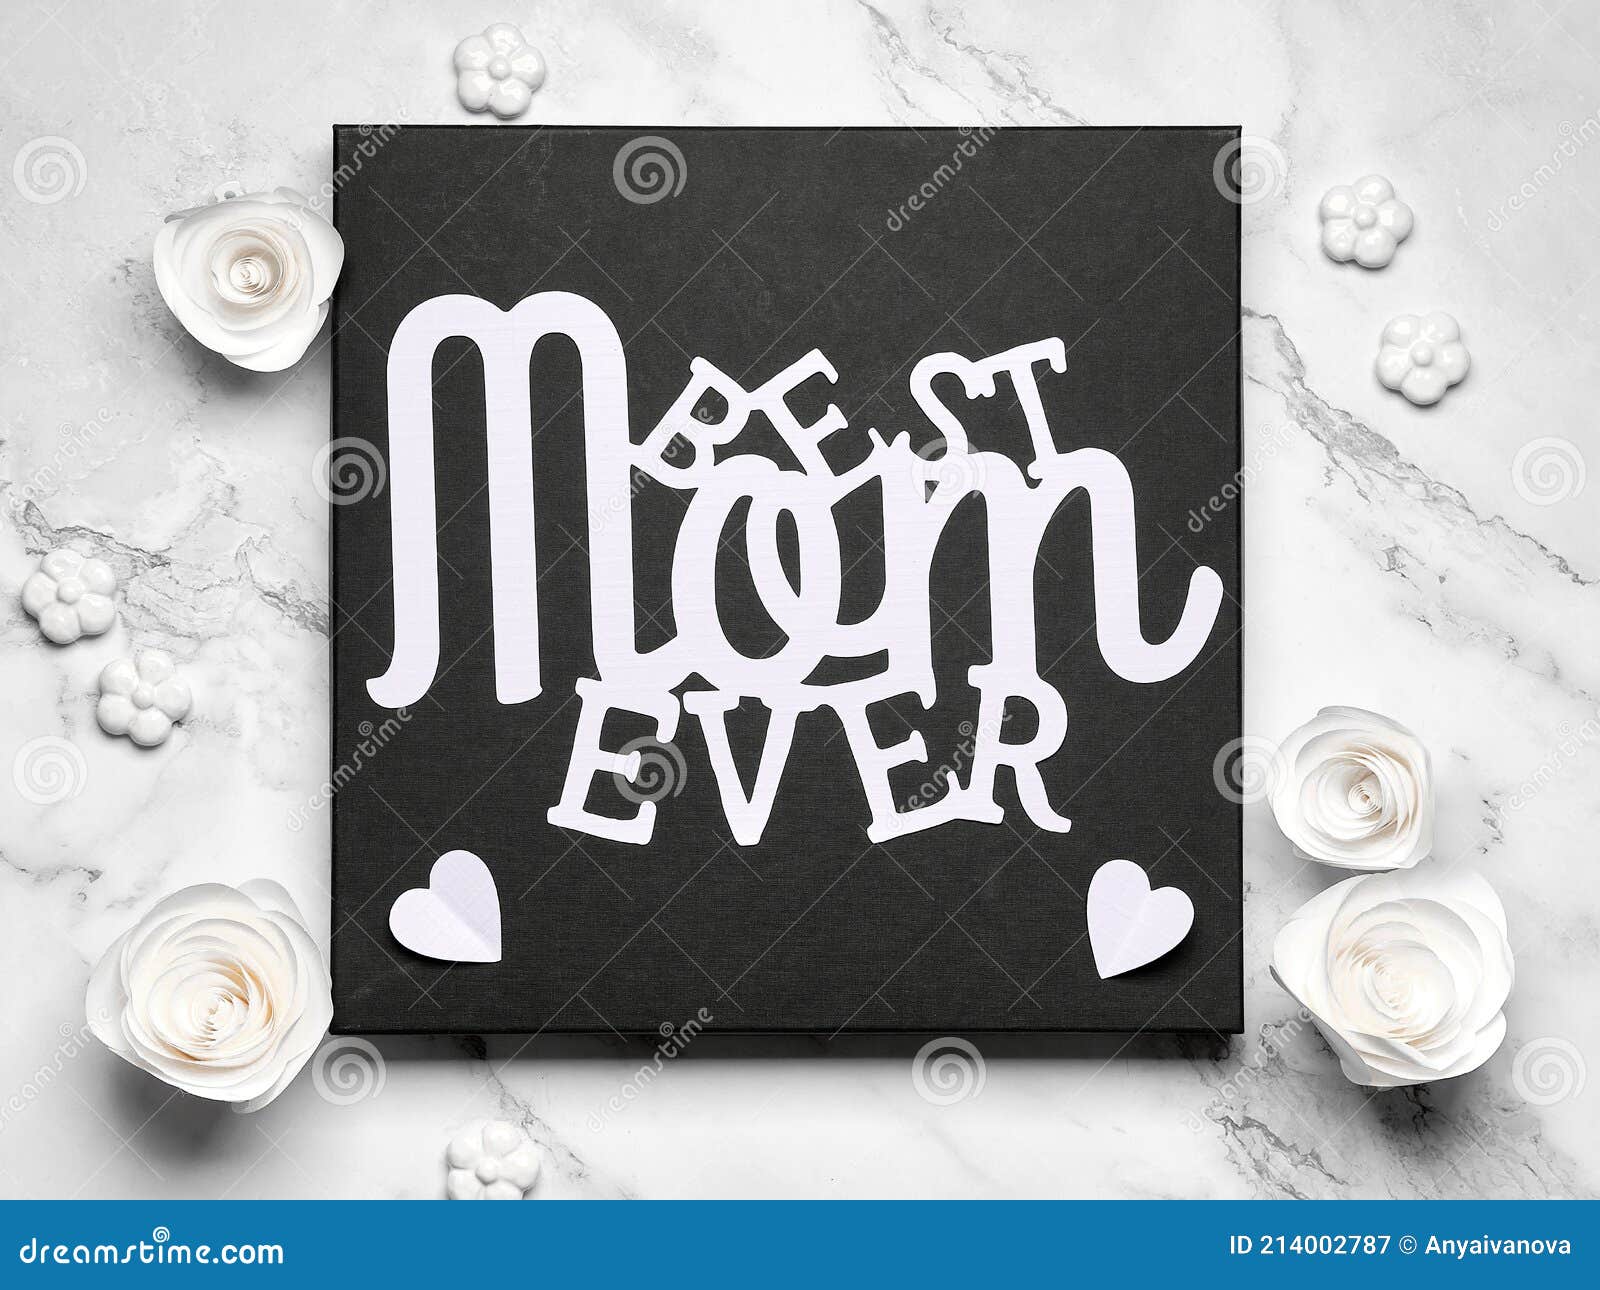 Text Best Mom Ever on Square Board, Frame. Greeting Card Design for Mother's Day. White Paper Roses on Ivory Stock Image - Image of textured, fresh: 214002787